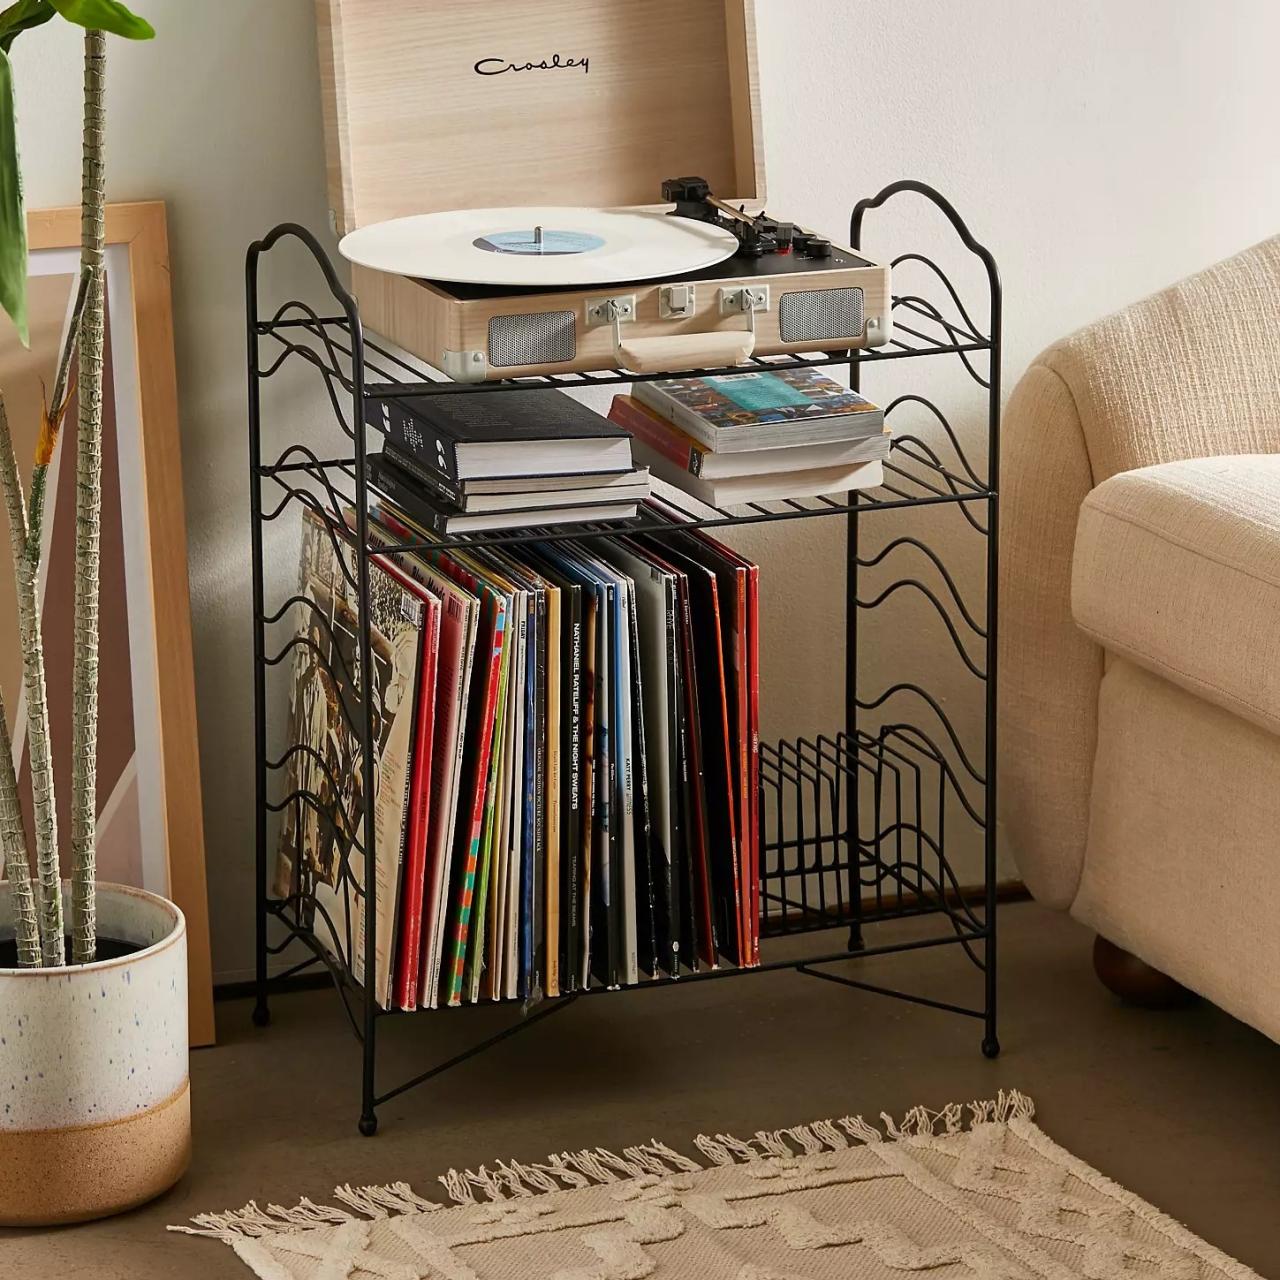 The best vinyl records to collect and show off your system